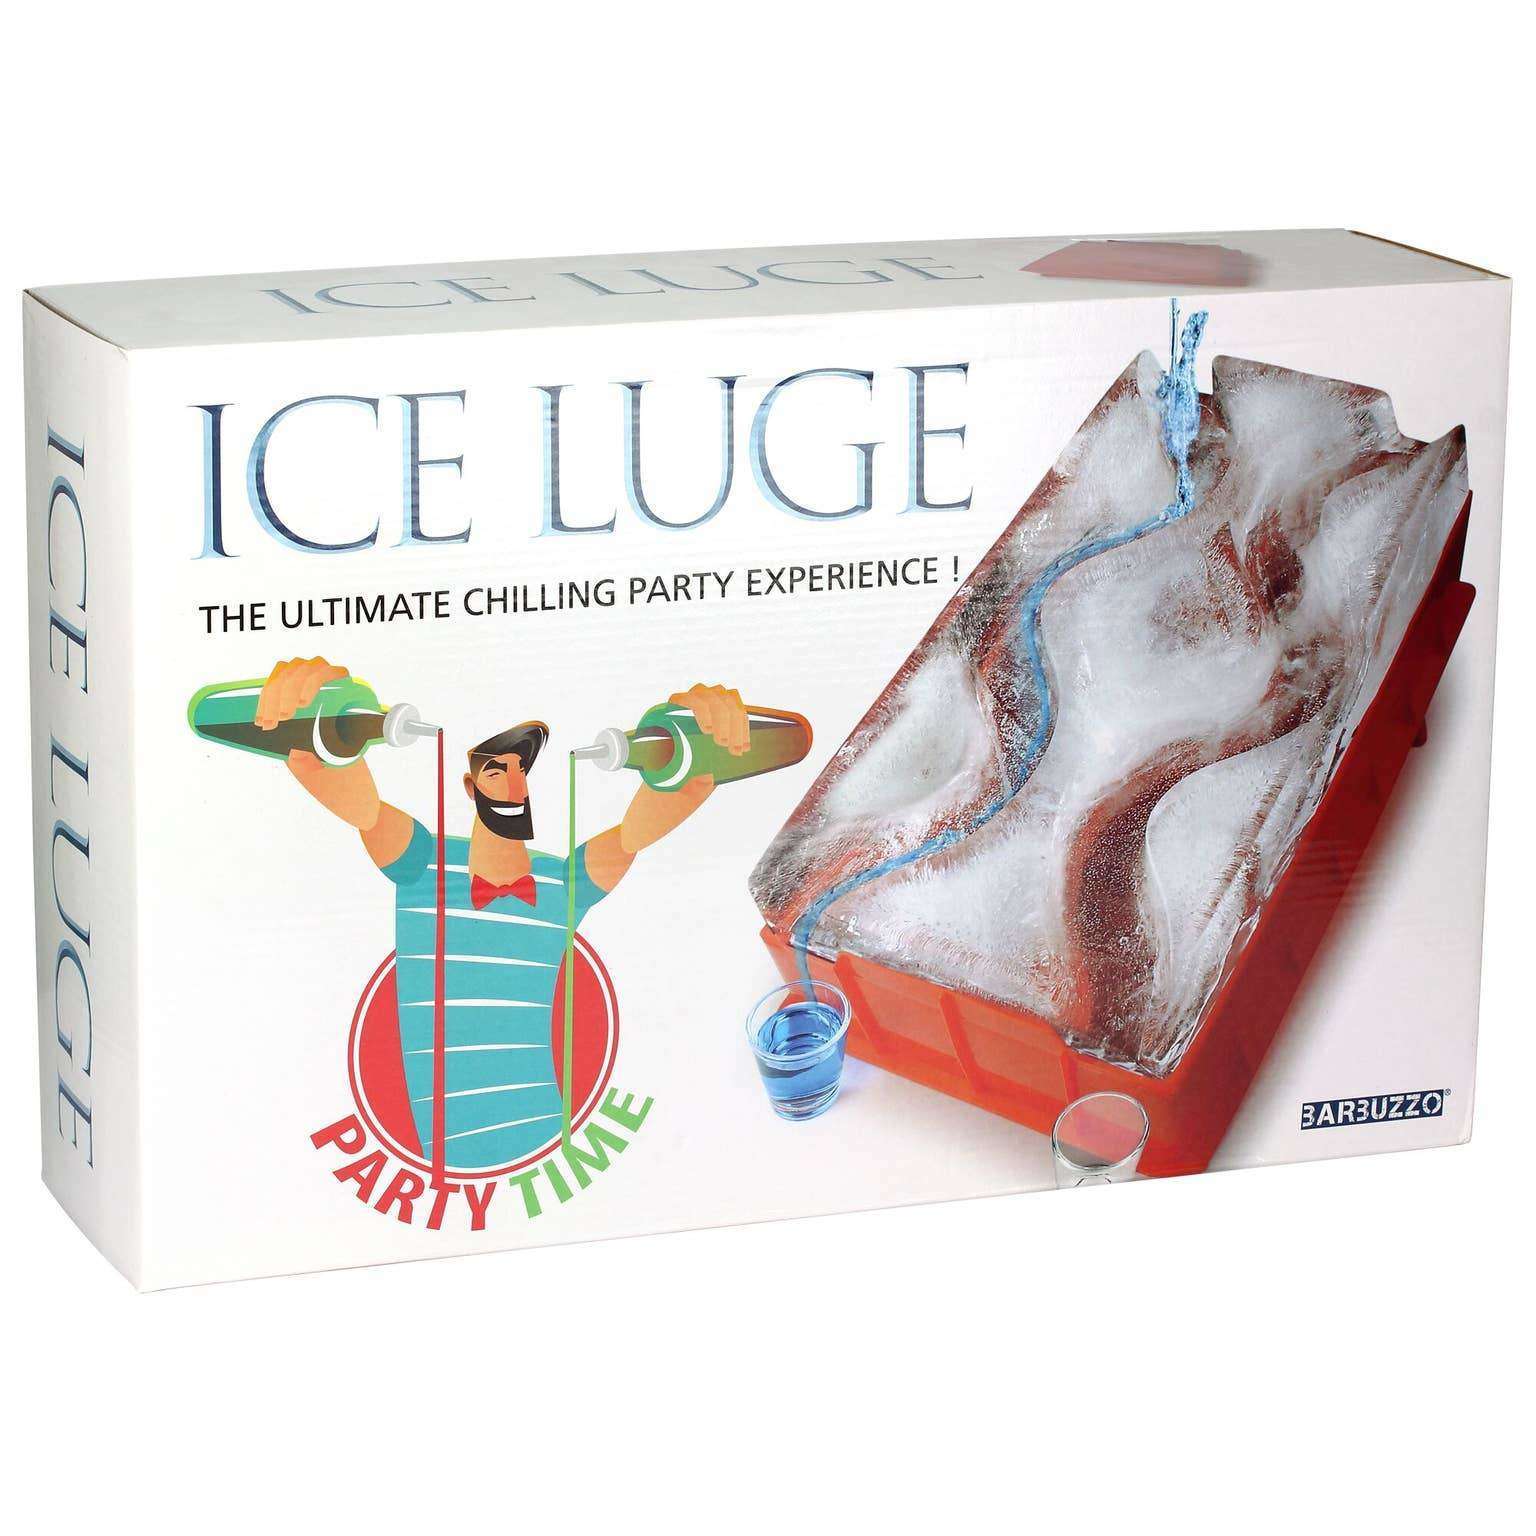 Ice Luges NJ - Shot Luges NJ - Ice Luges For Sale in NJ - Esposito's Ice